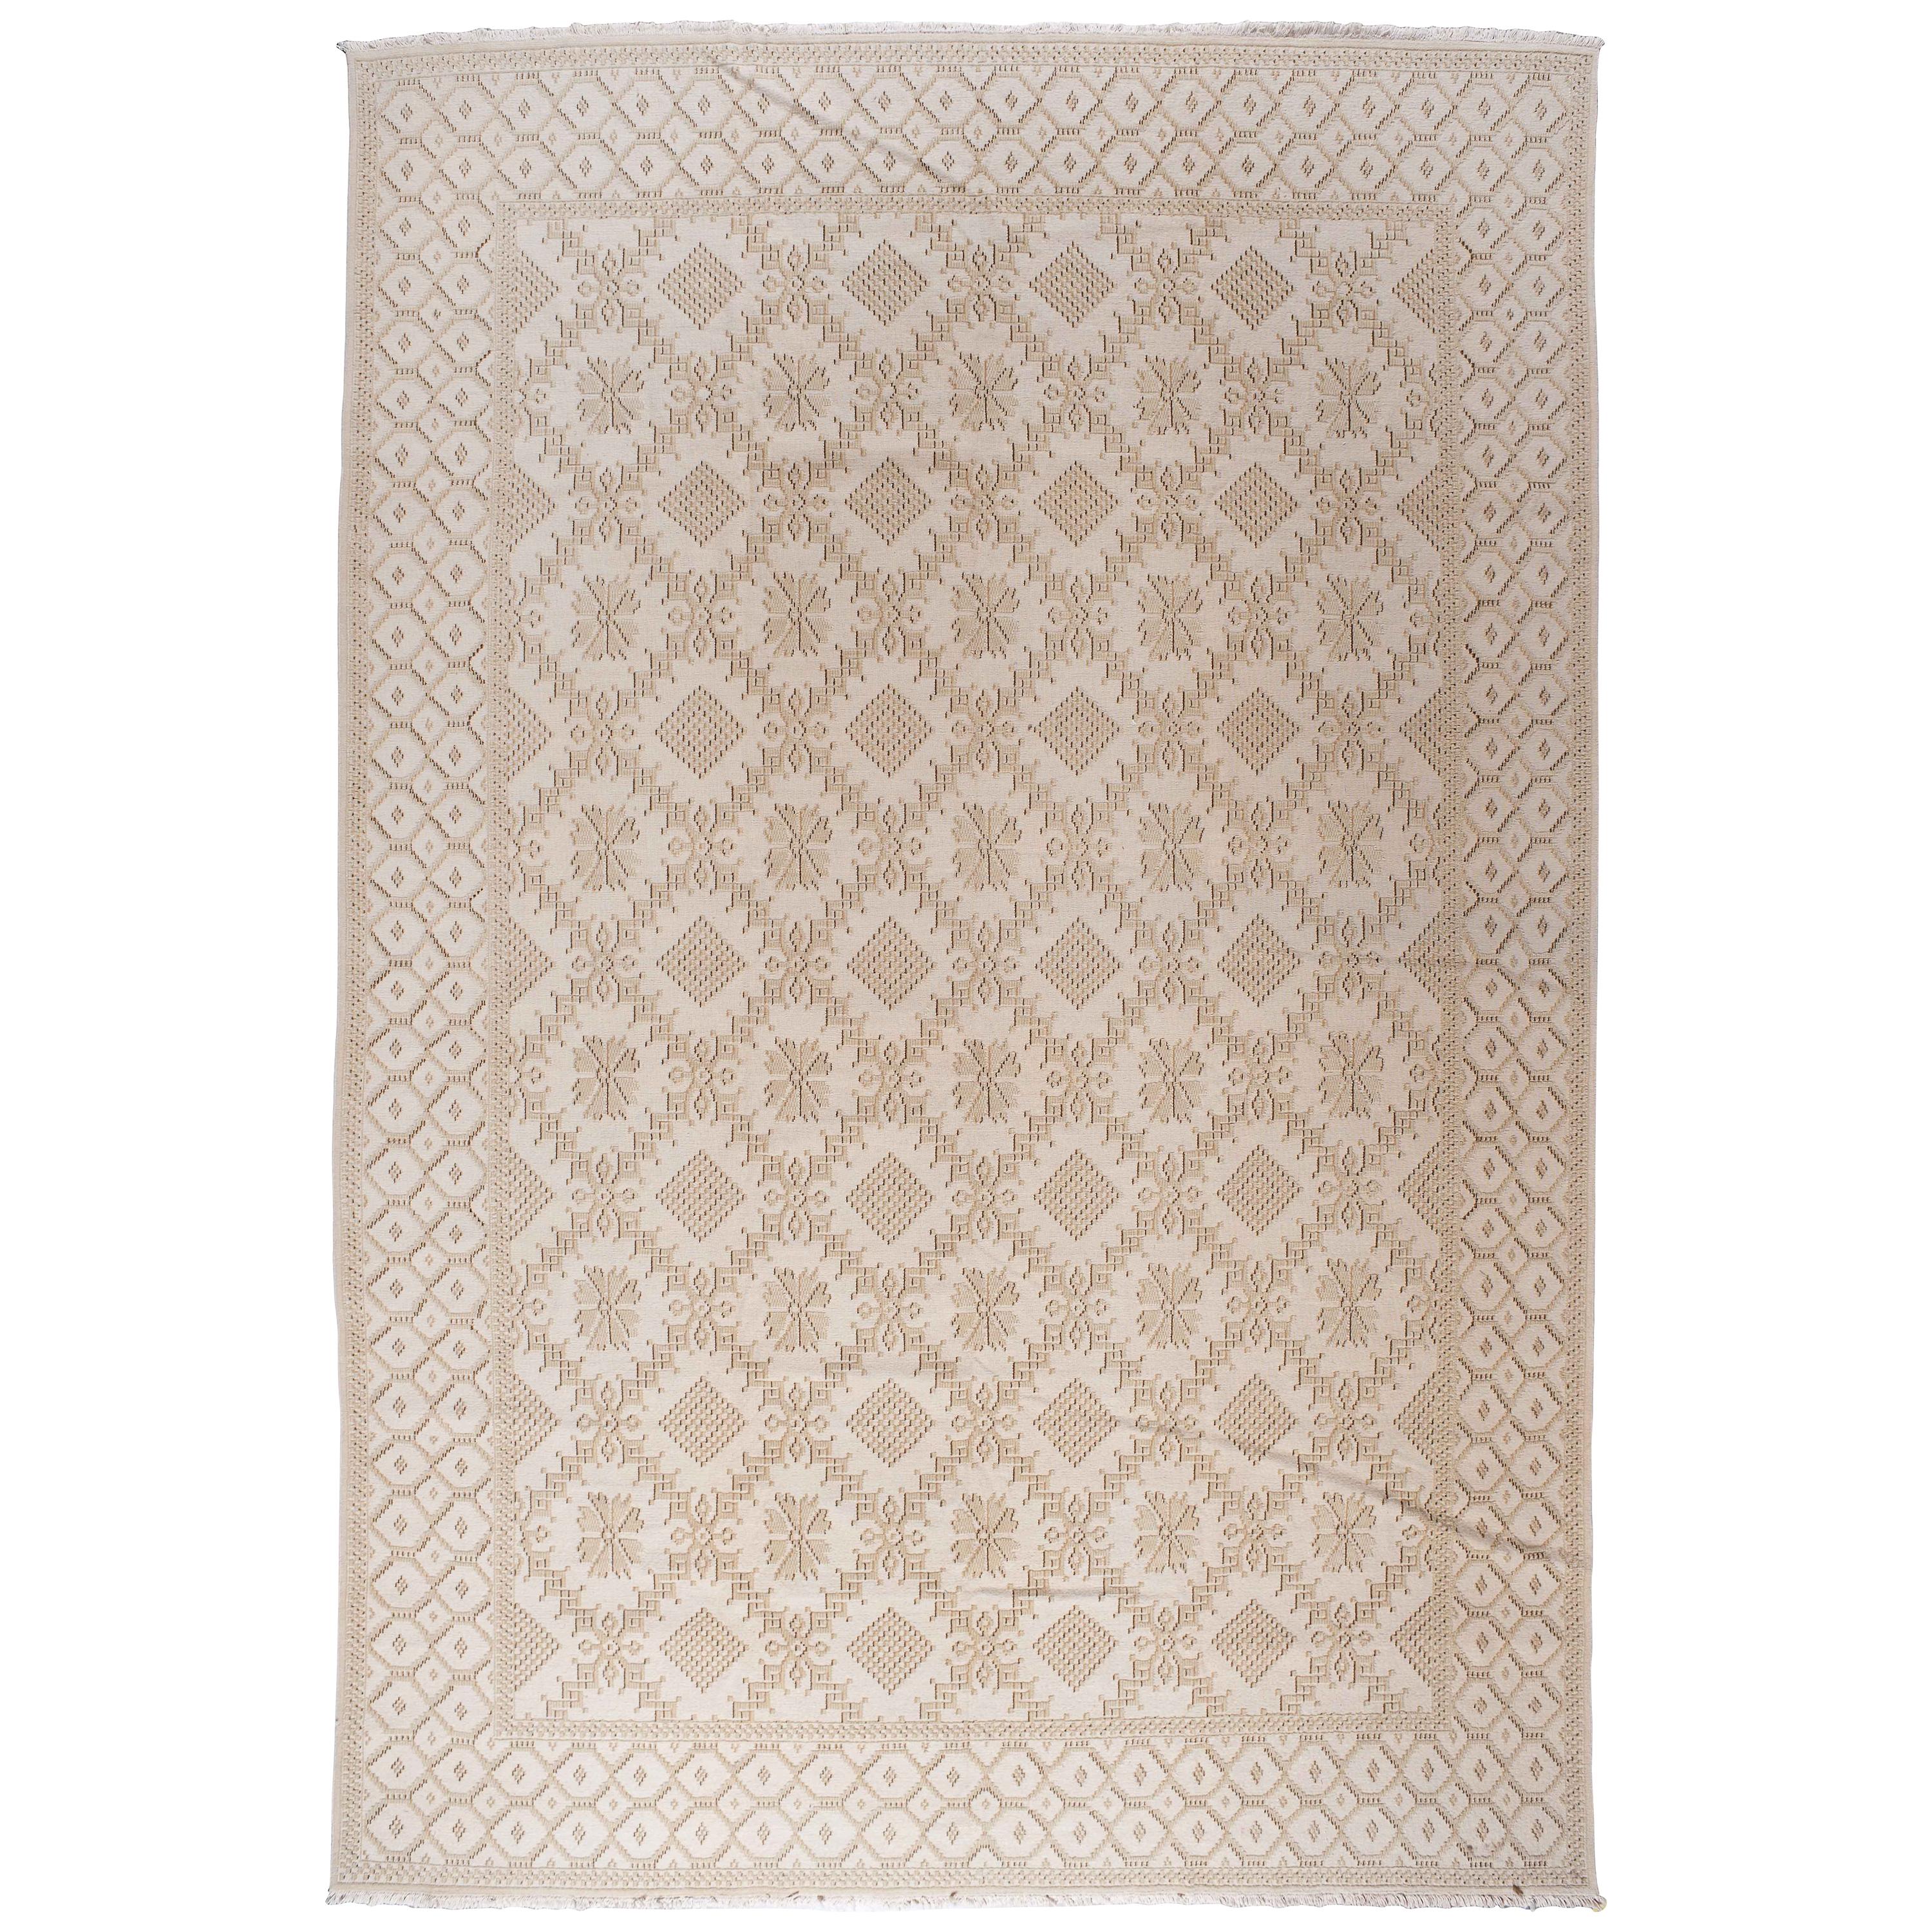 Beige and Tan Lacework Rug For Sale